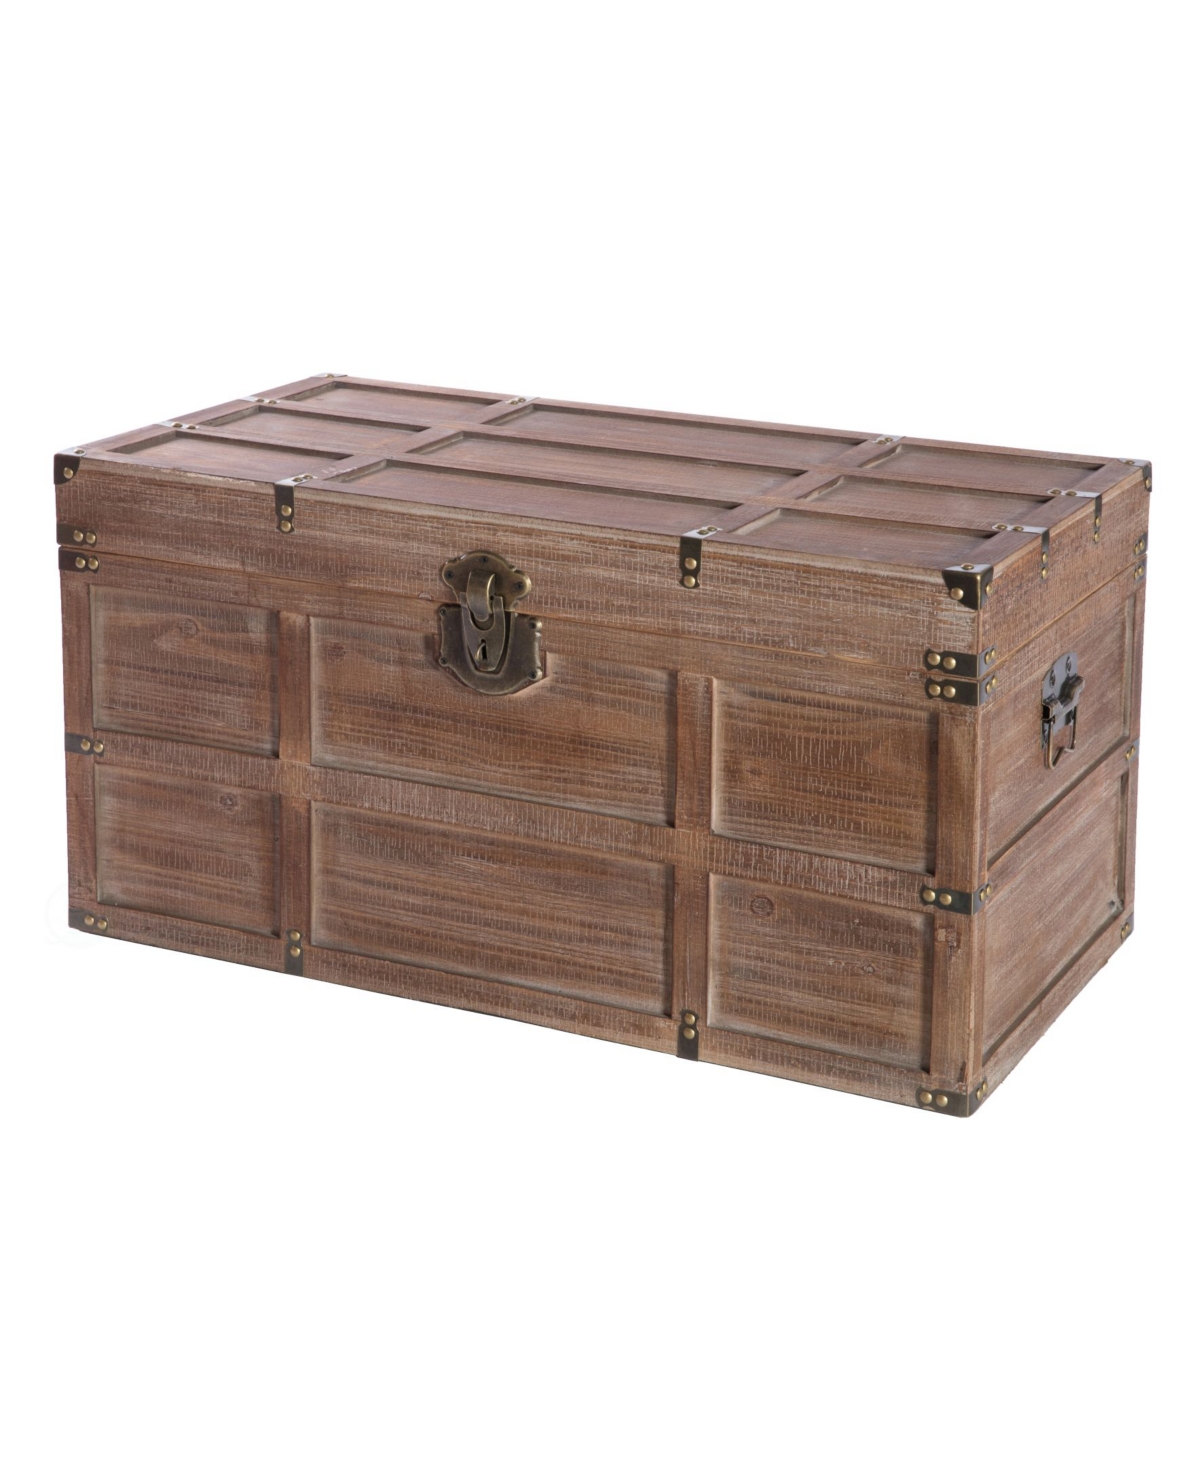 Wooden Rectangular Lined Rustic Storage Trunk with Latch, Large - Brown